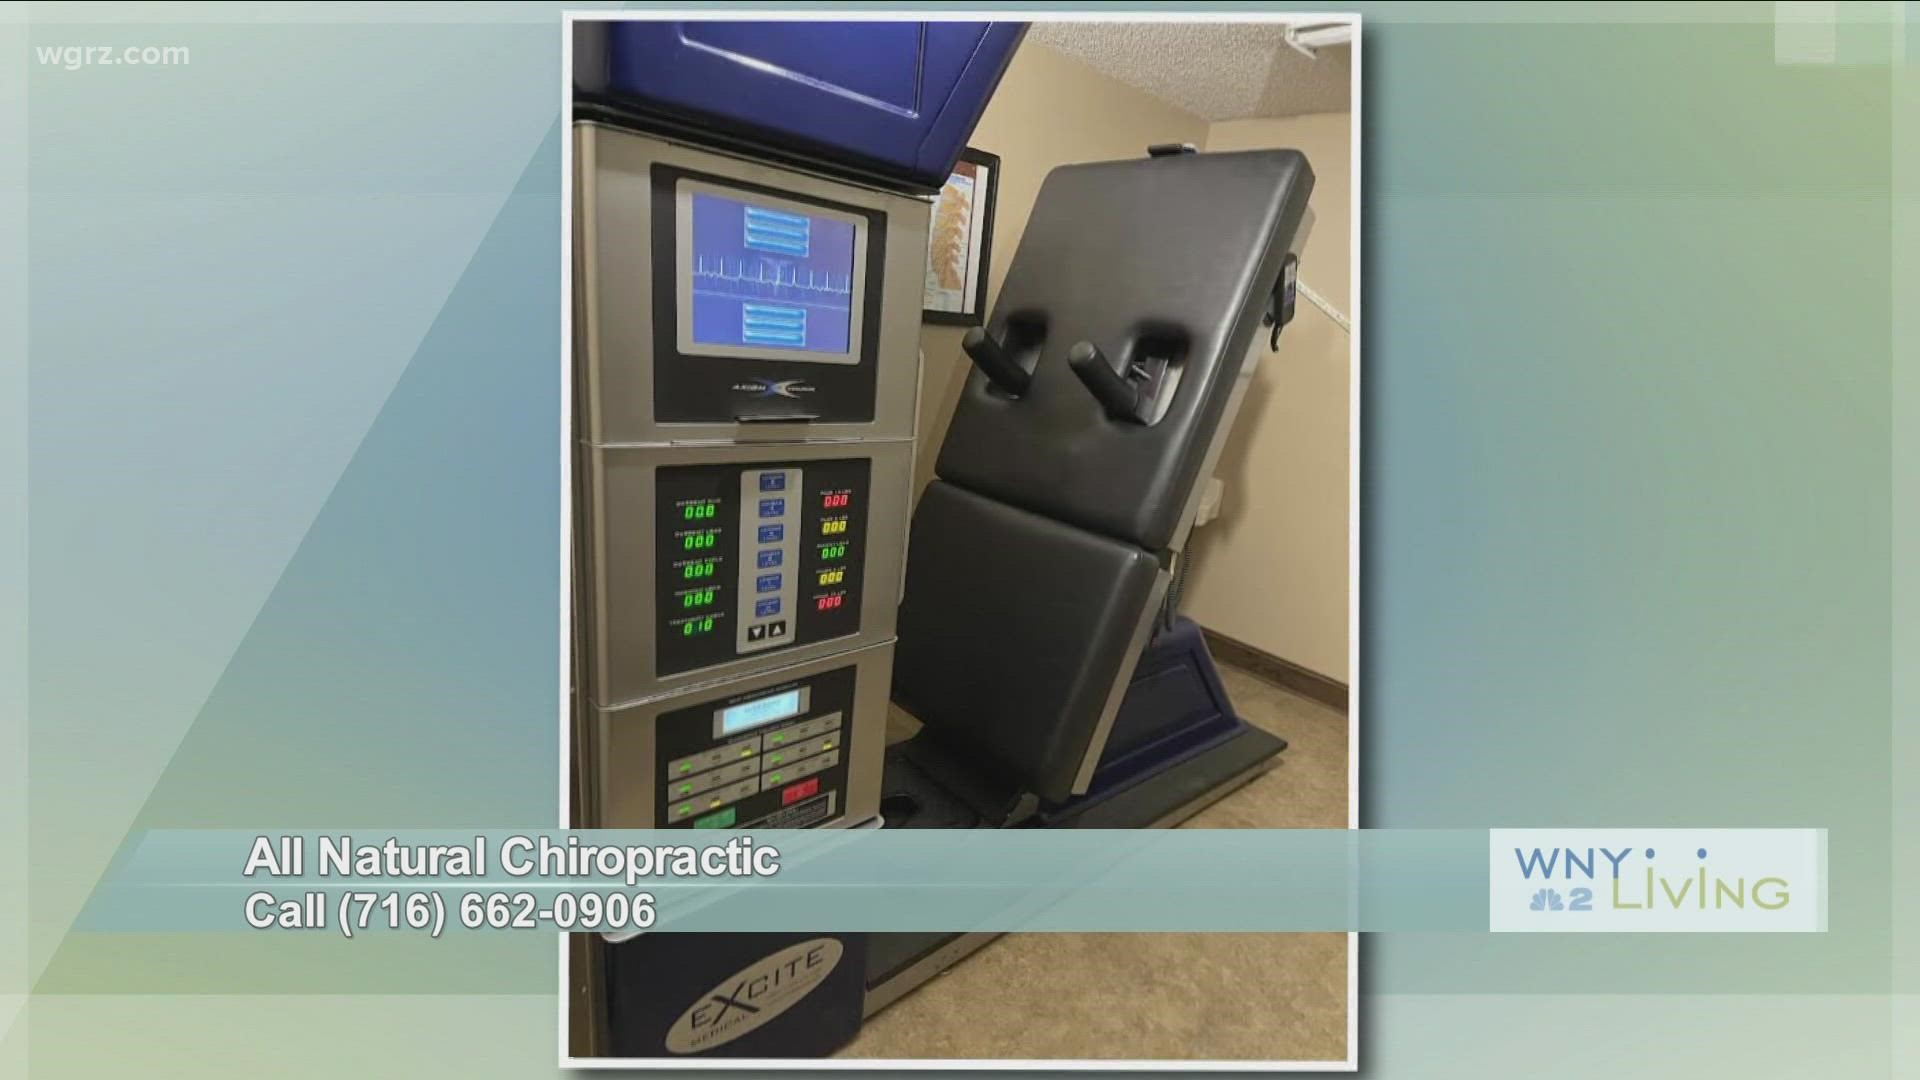 WNY Living - February 26 - All Natural Chiropractic (THIS VIDEO IS SPONSORED BY ALL NATURAL CHIROPRACTIC)